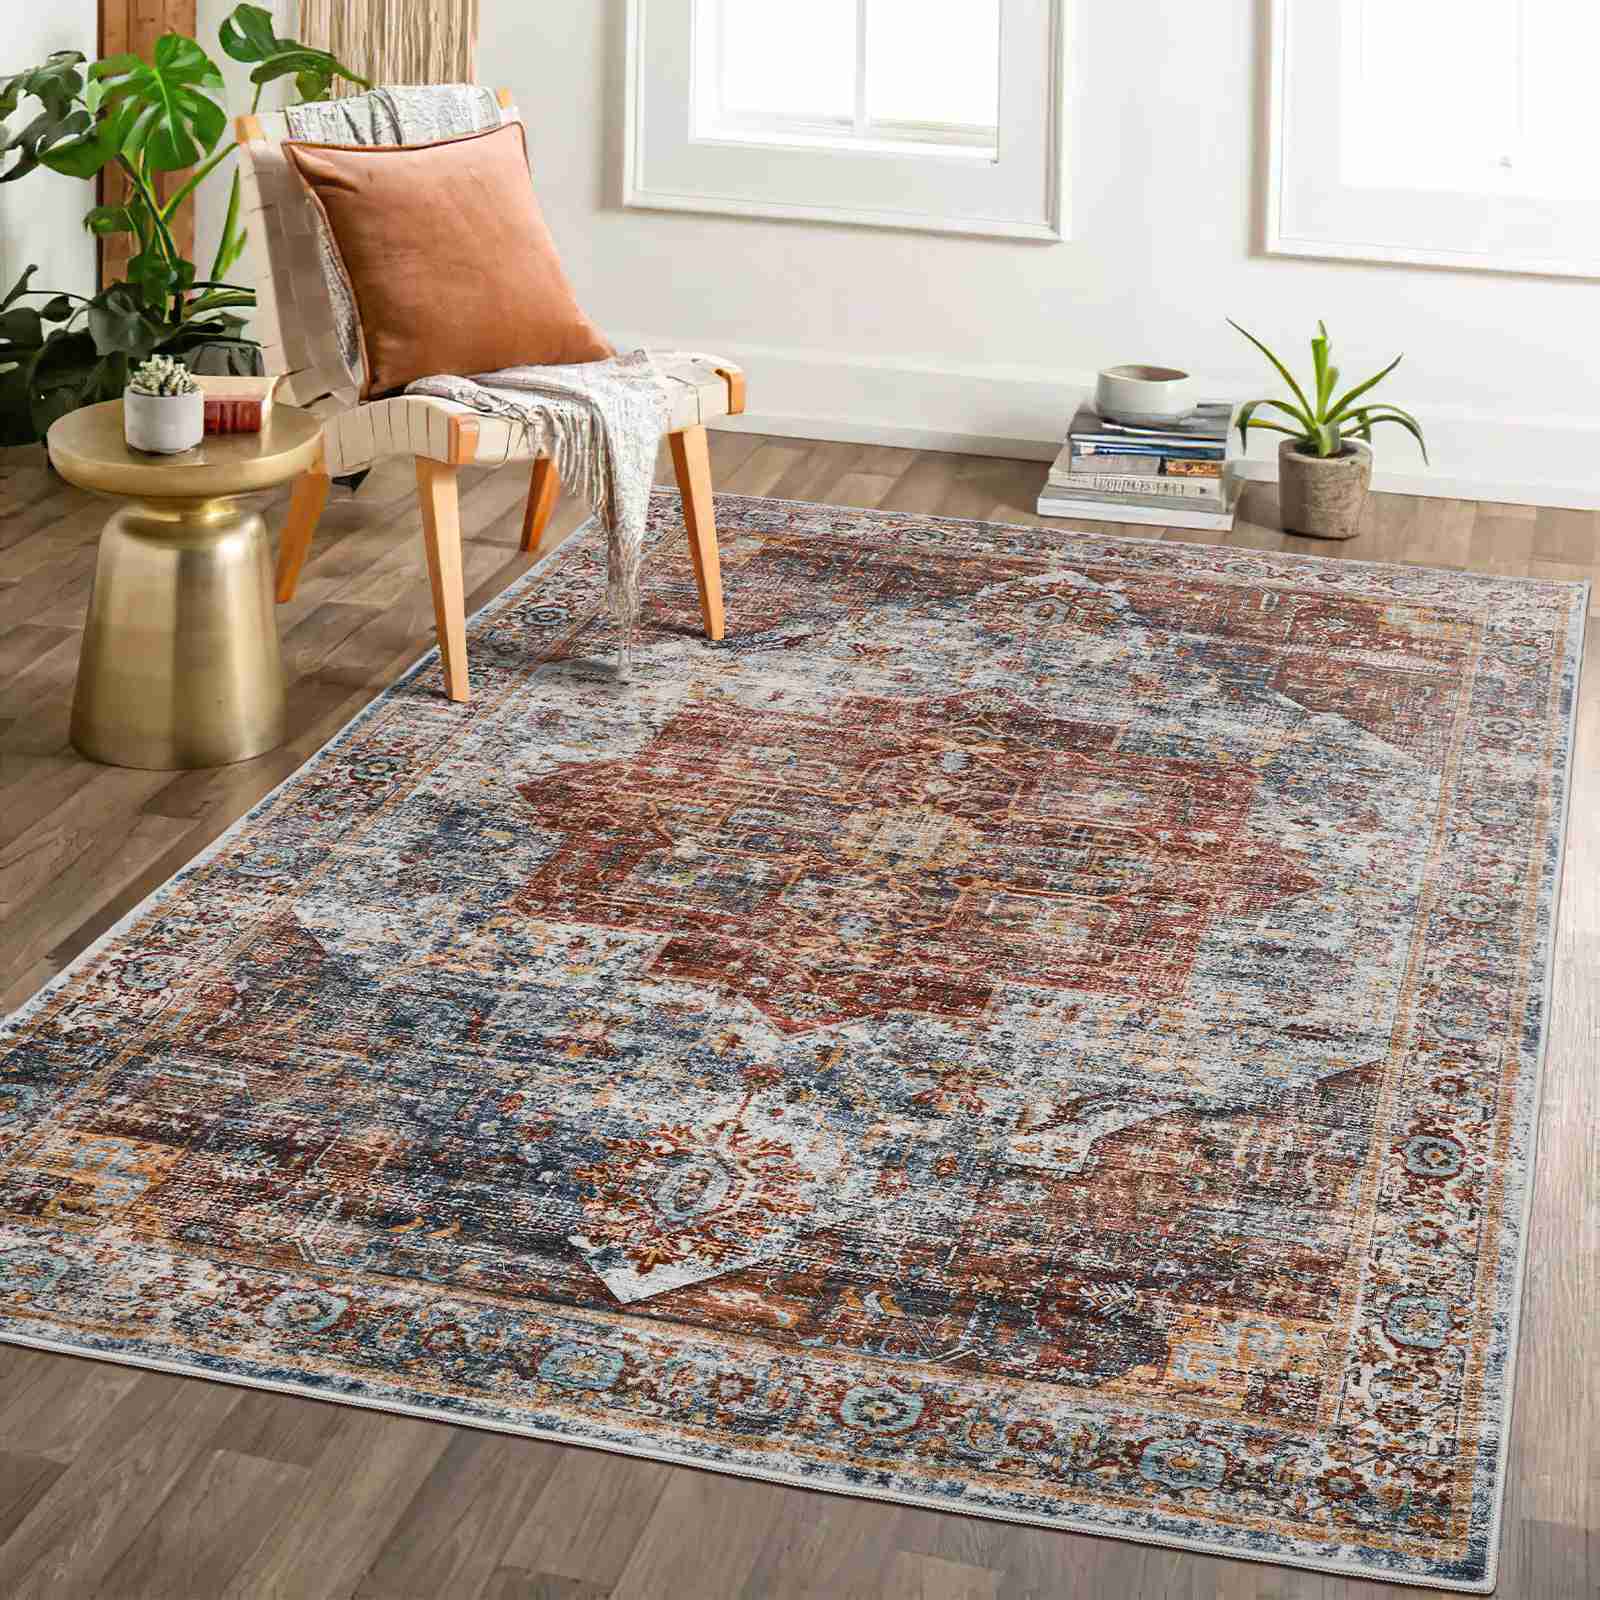 ComiComi Area Rugs for Living Room Keyvan Red